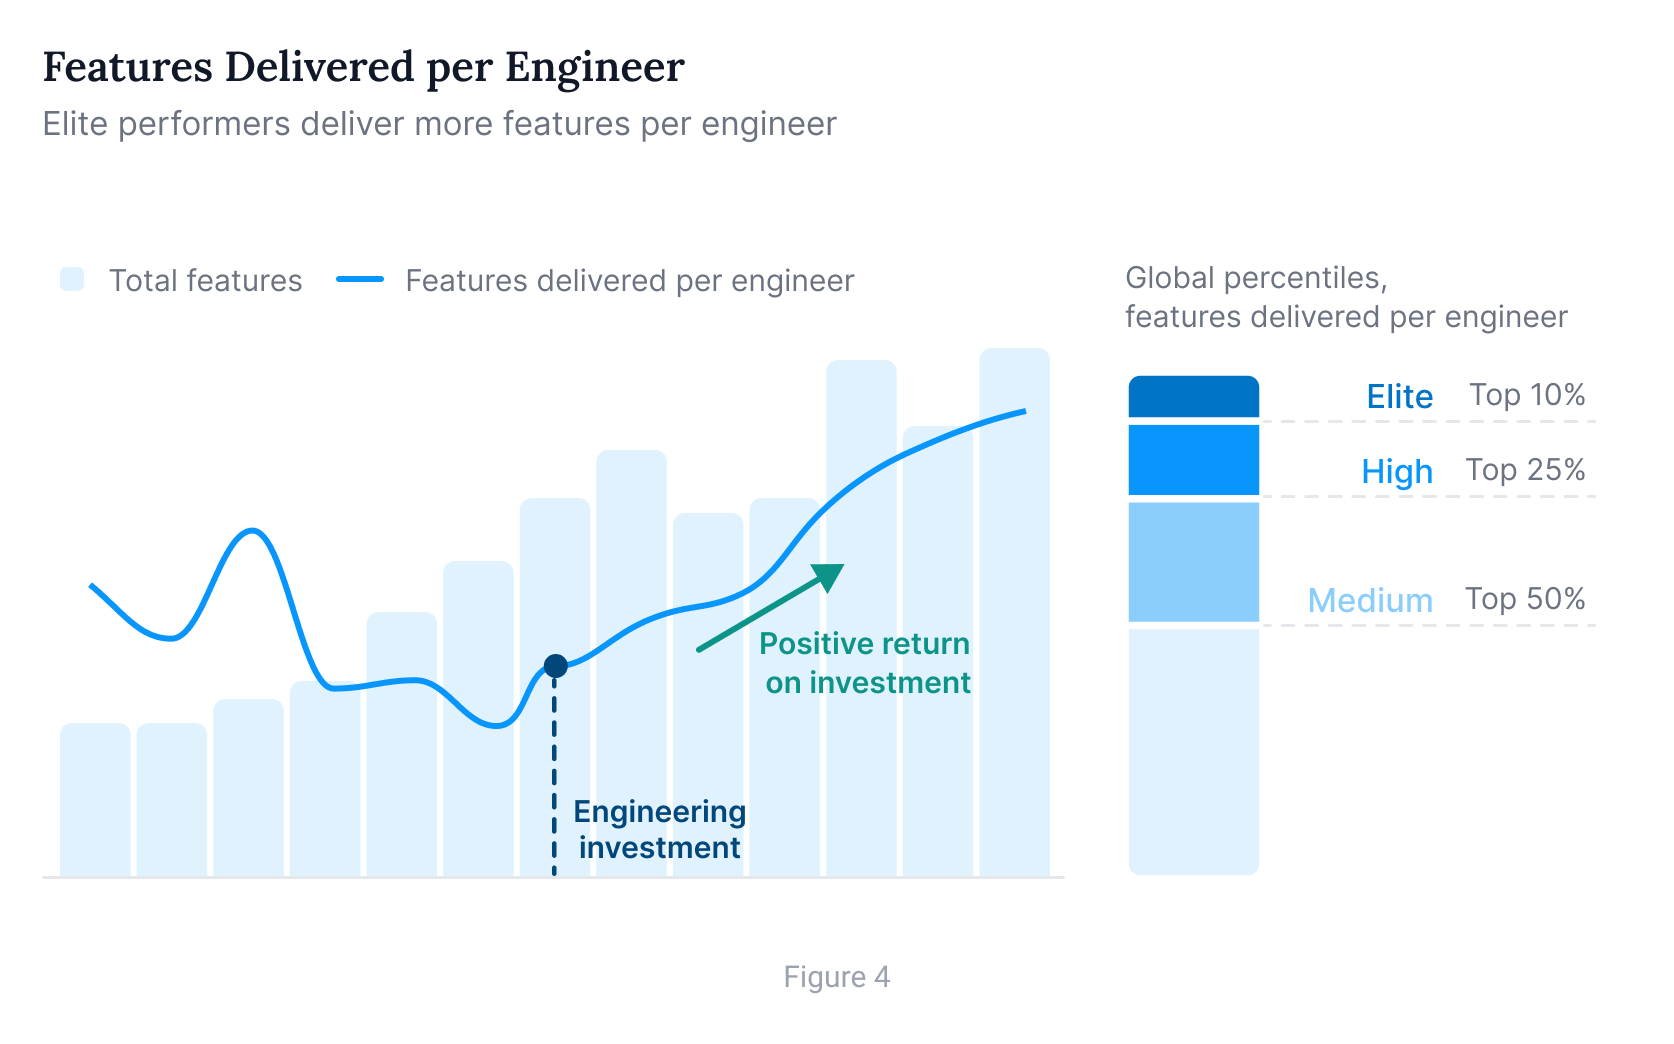 Features delivered per engineer